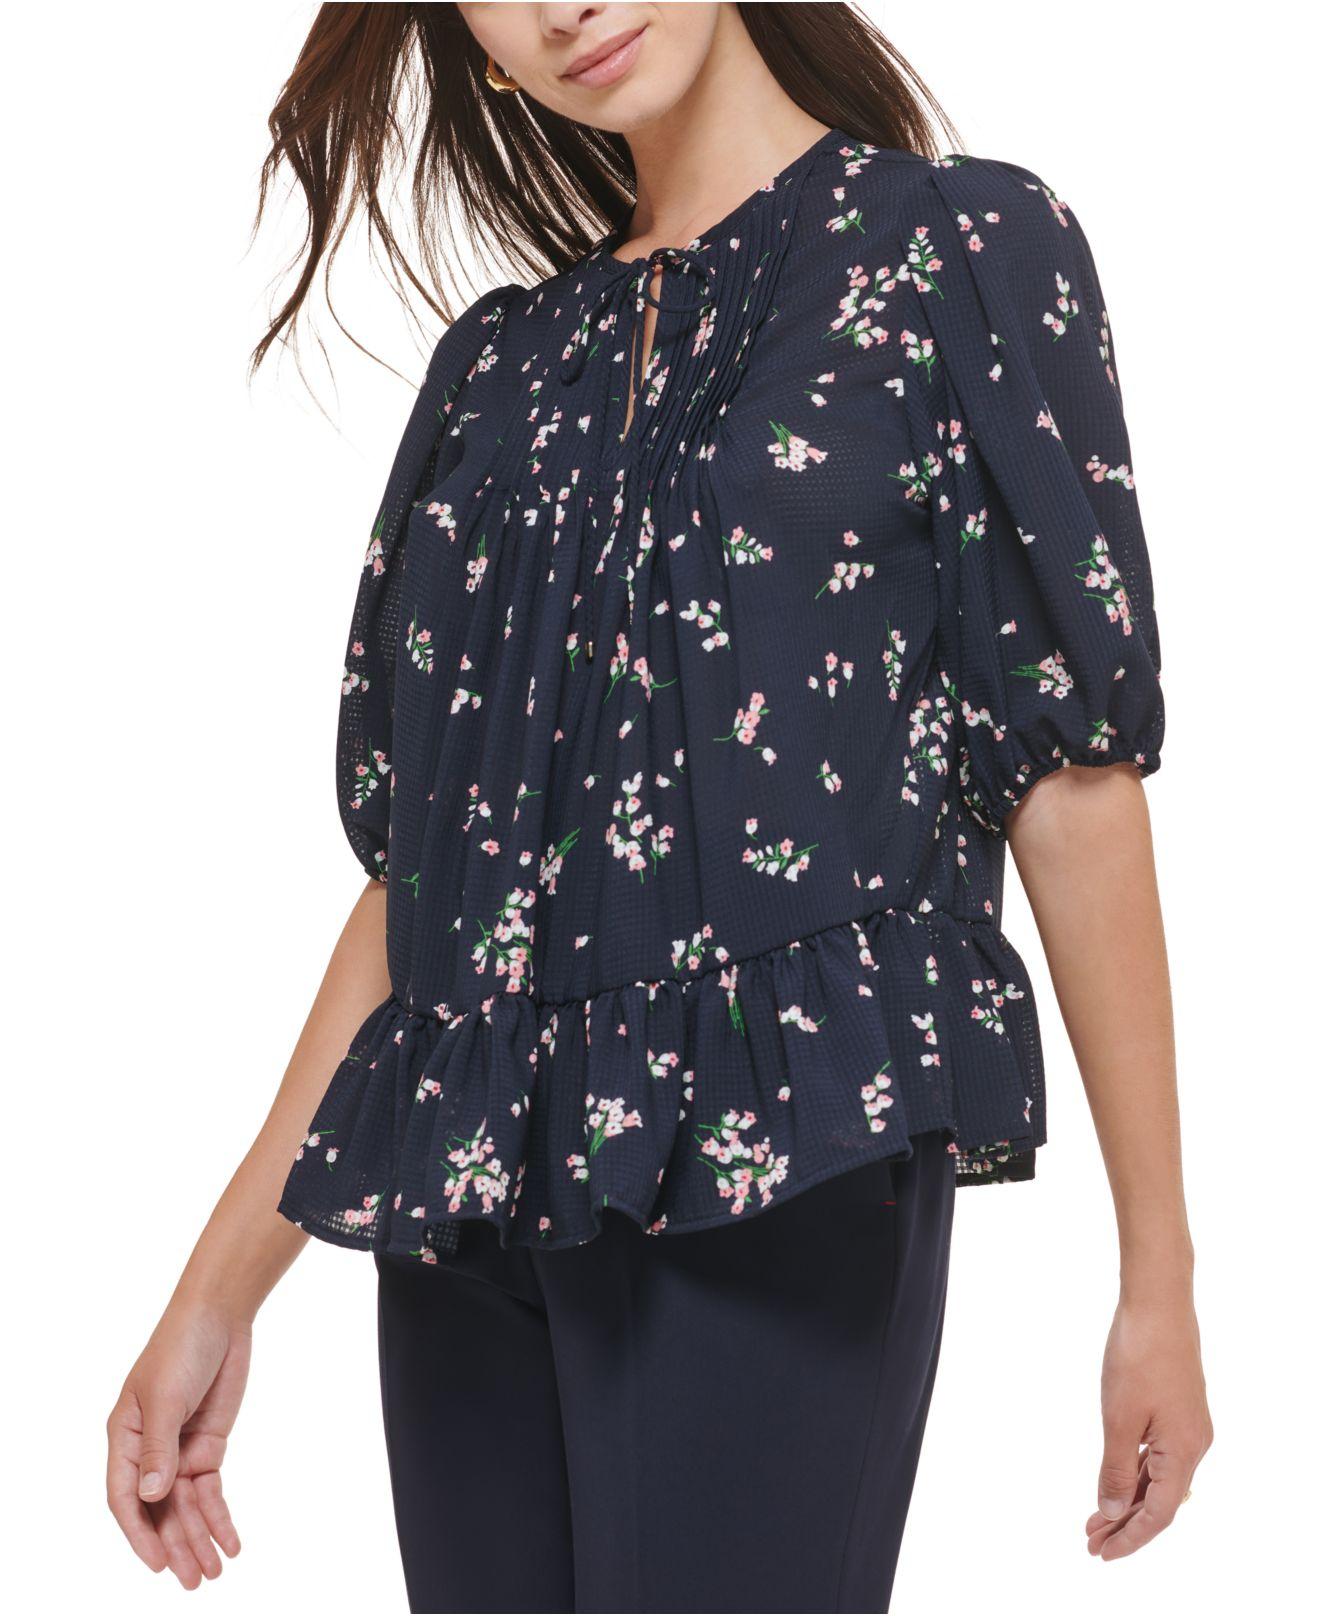 Thyoa blue floral print top